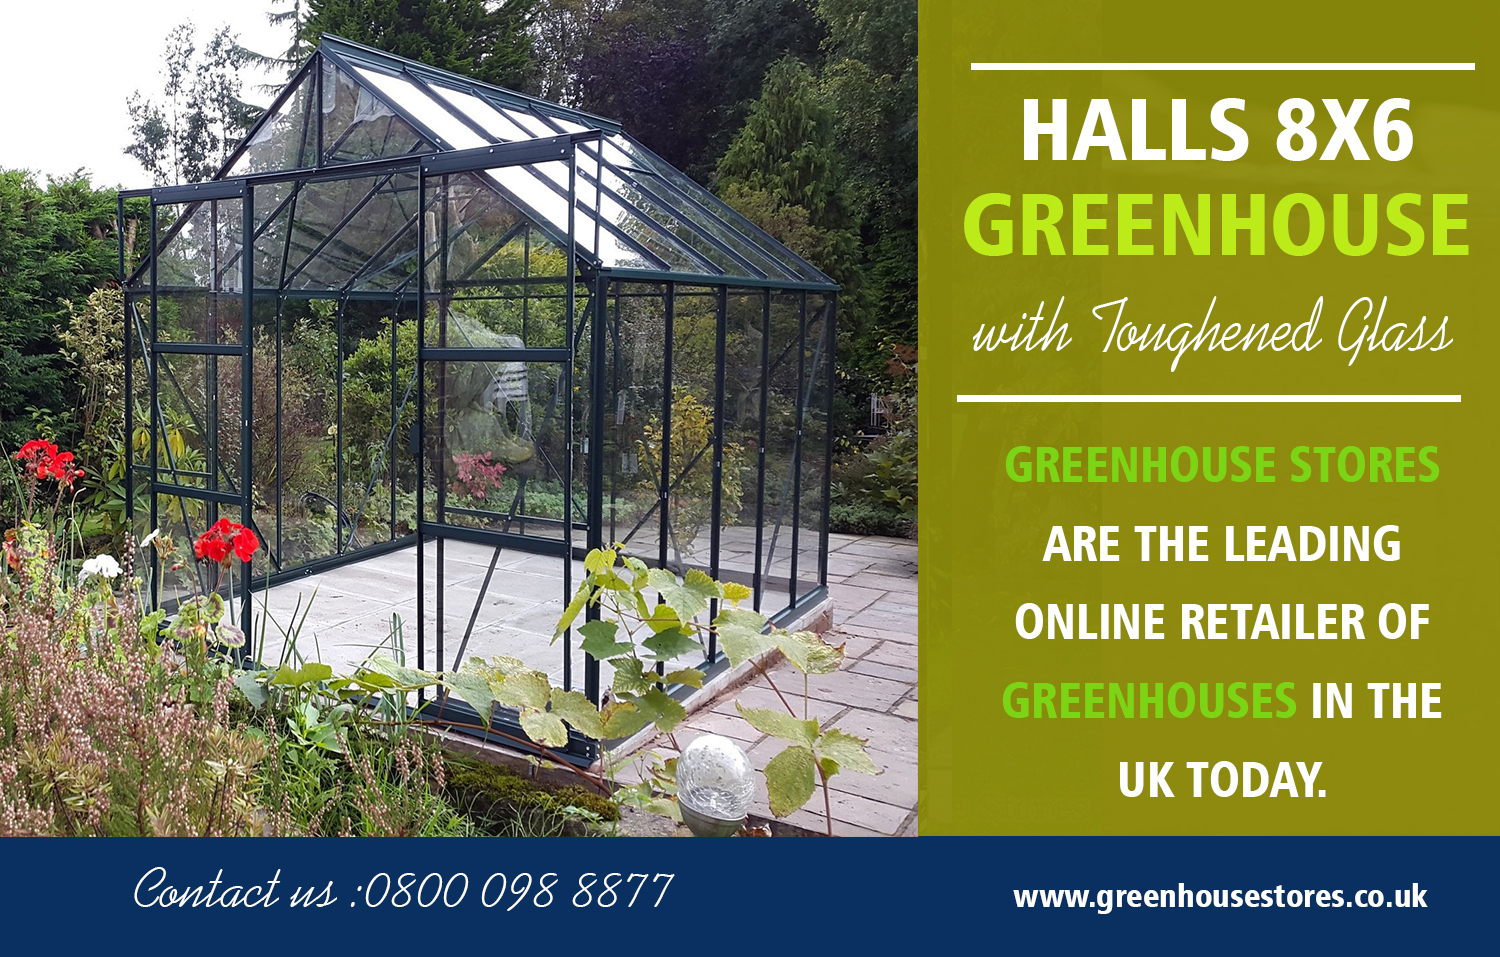 Halls 8x6 Greenhouse with Toughened Glass | 800 098 8877 | greenhousestores.co.uk